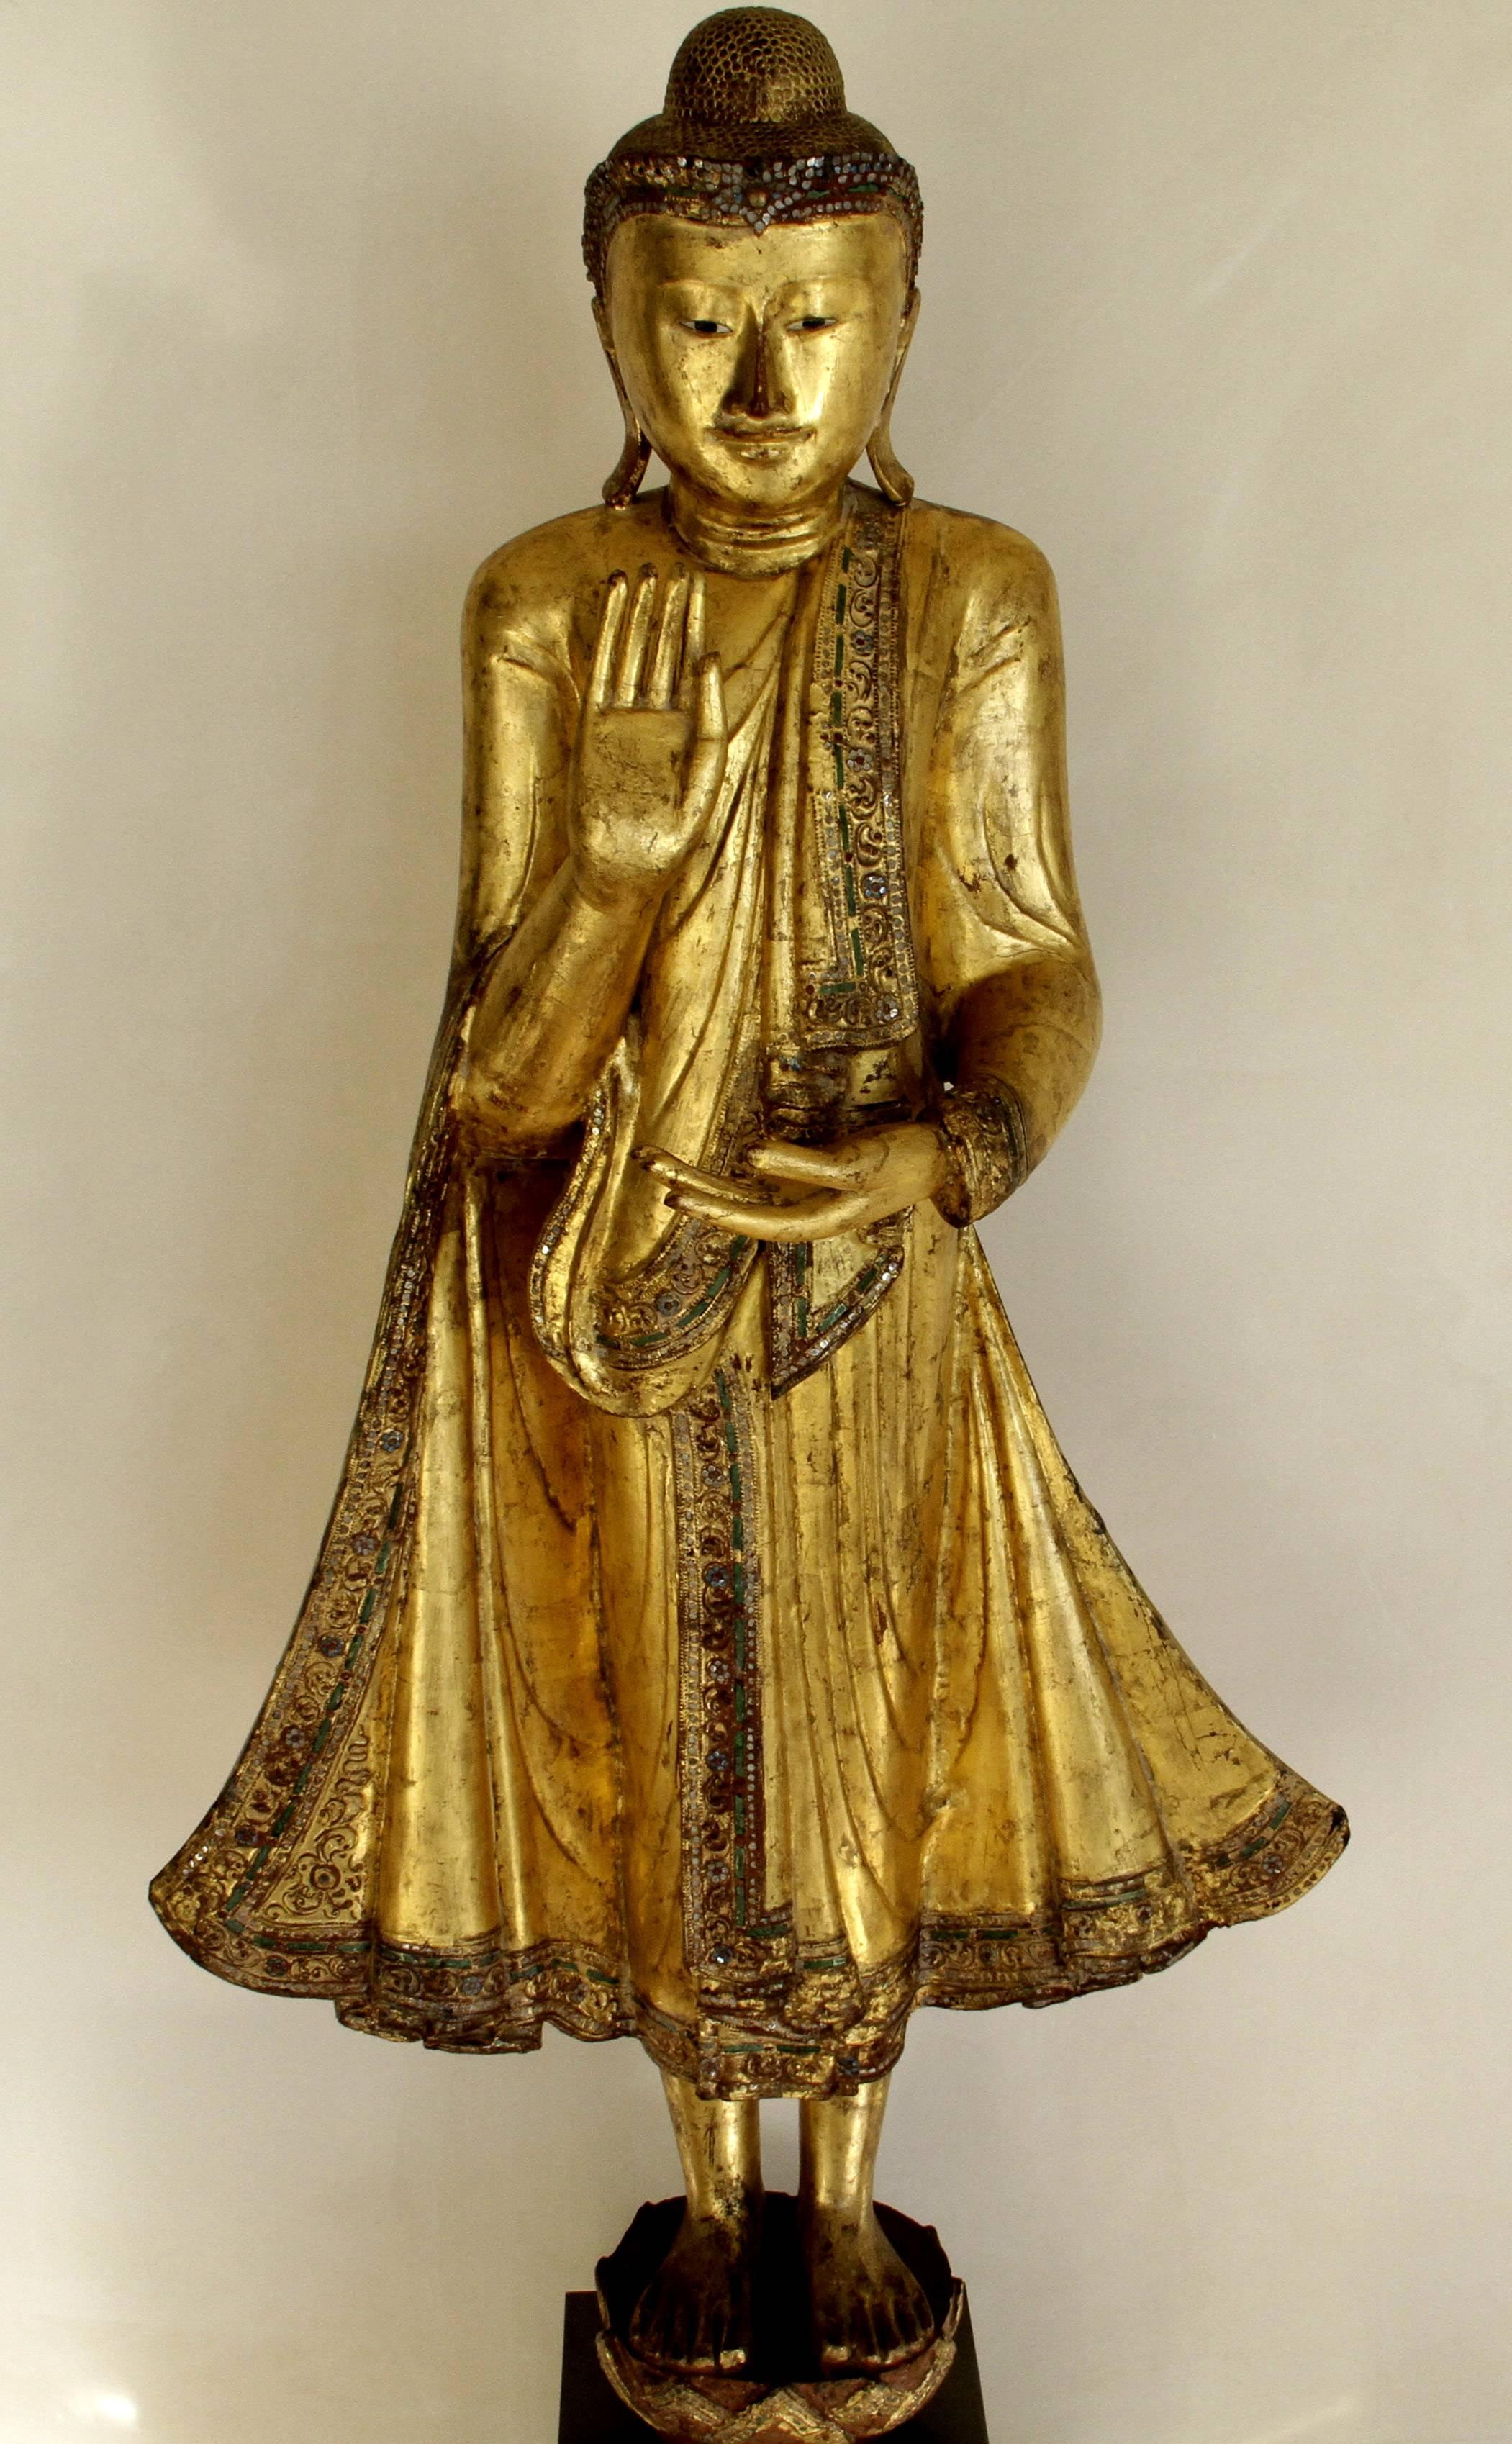 Carved Buddha Statue Mandalay Period Burma, 19th Century Certified Gold For Sale